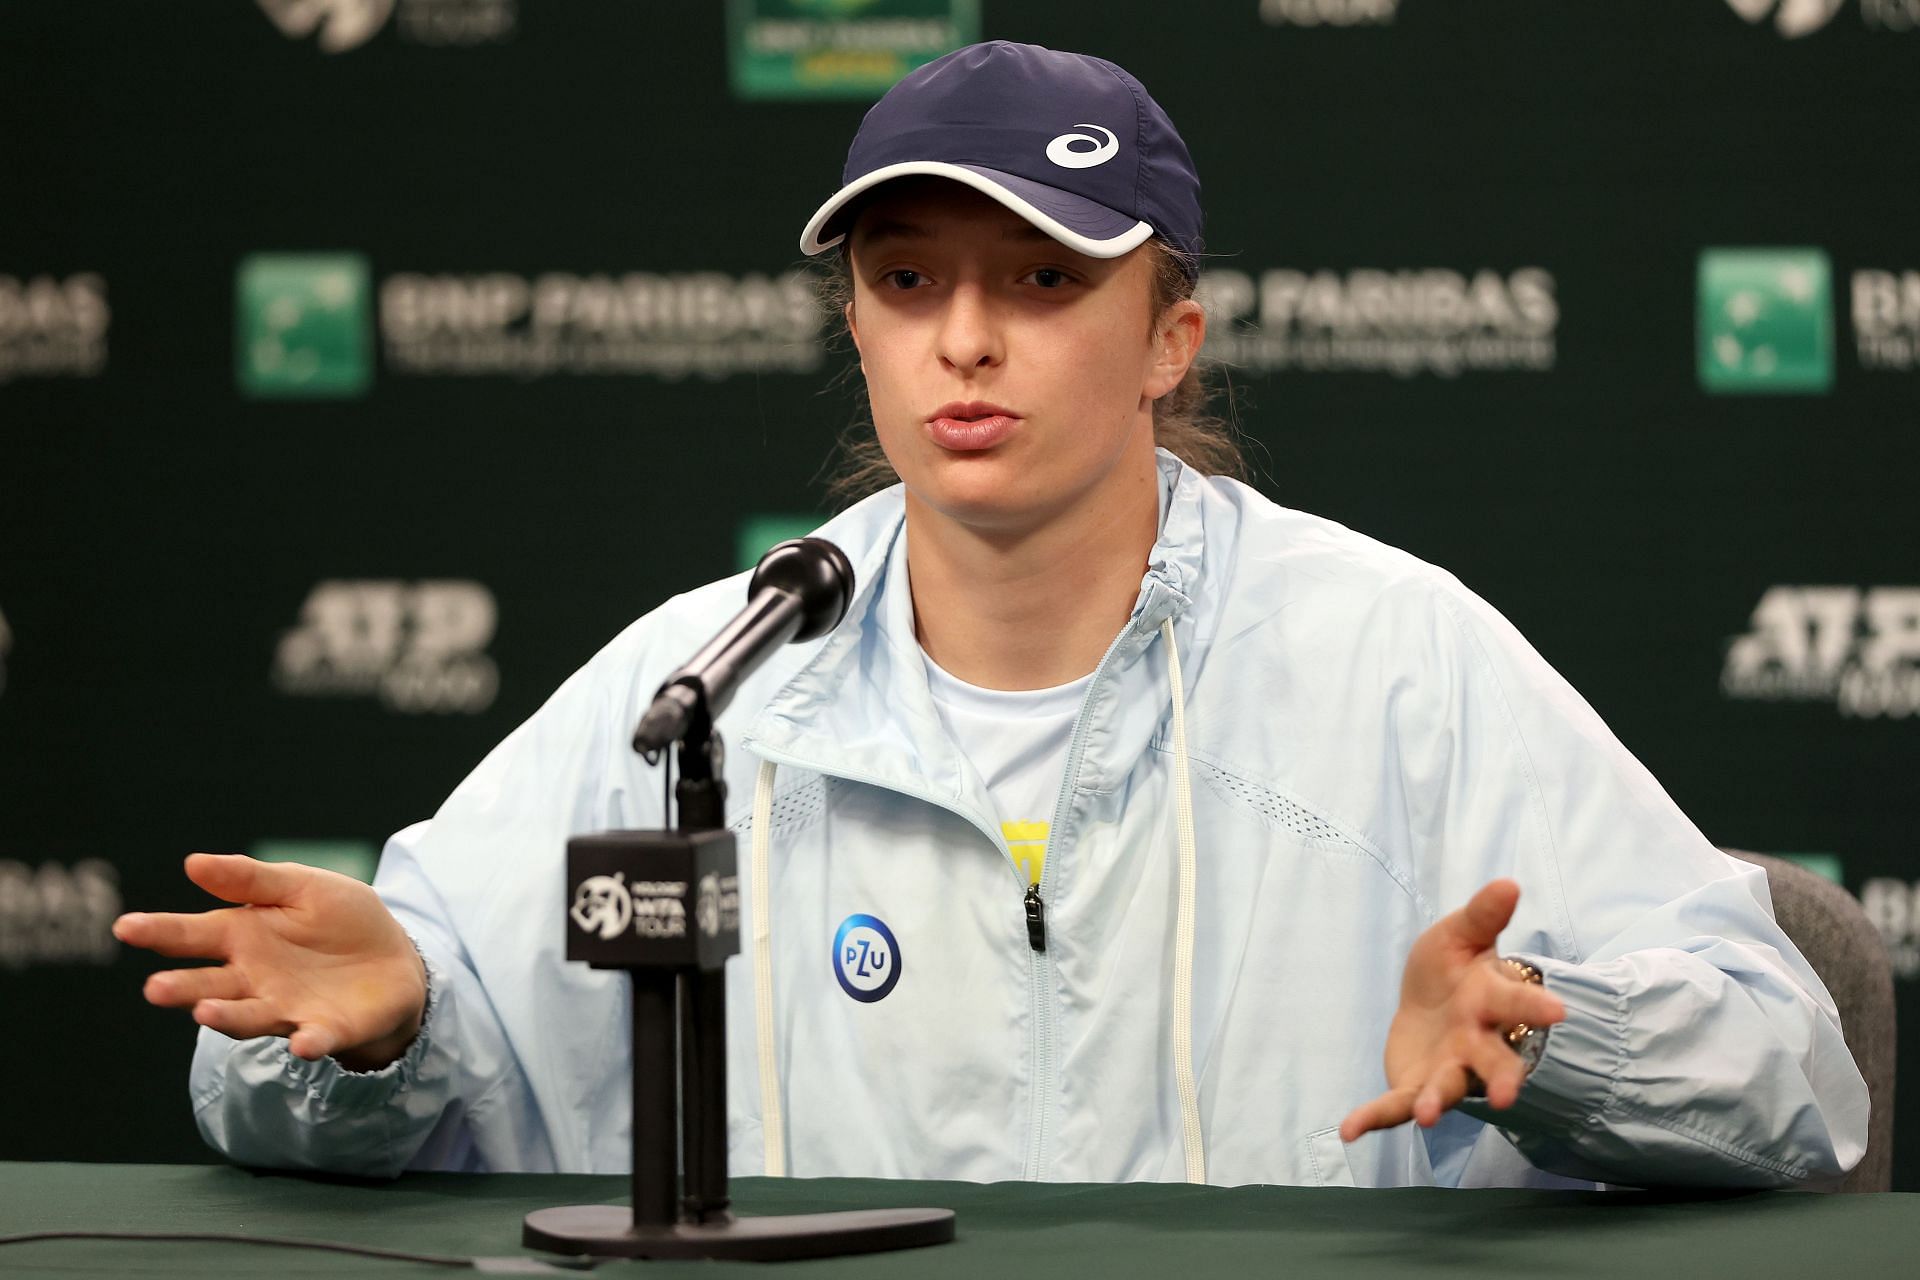 Iga Swiatek is the defending champion at Indian Wells this year.